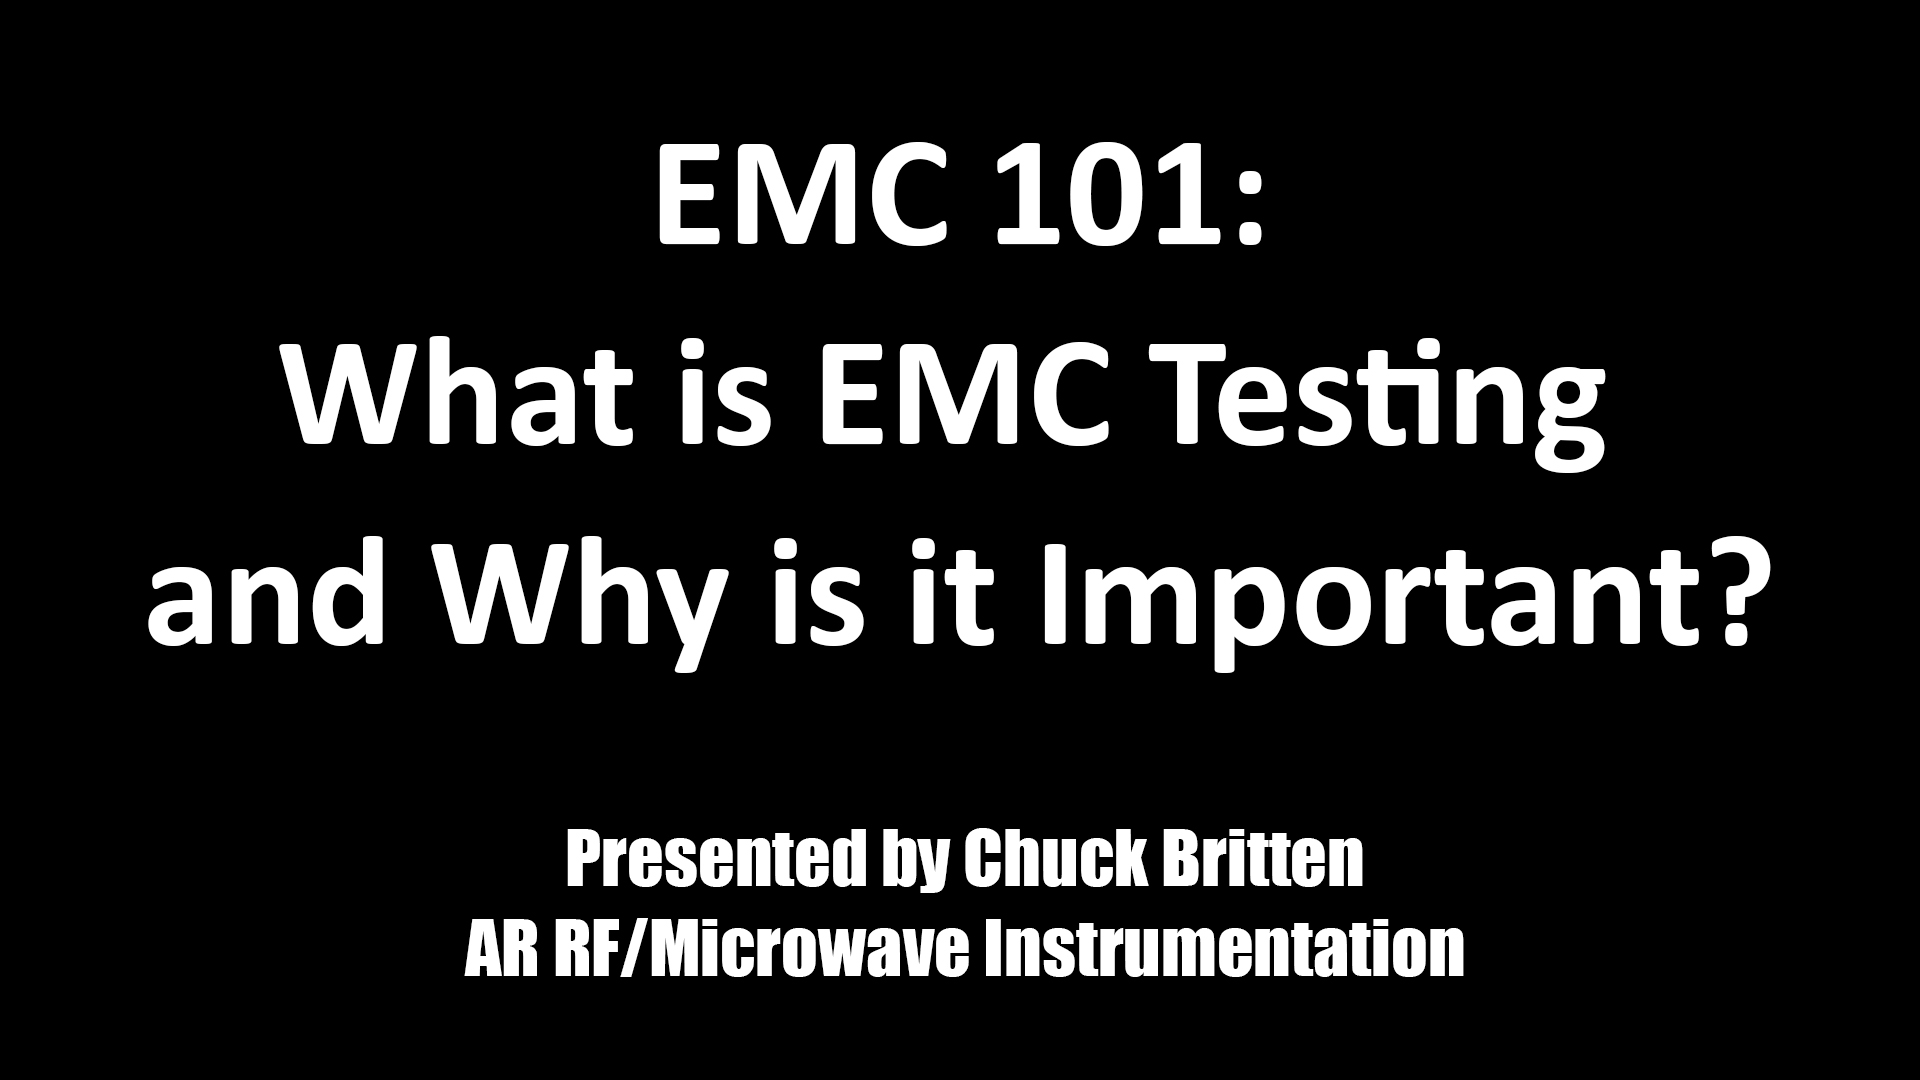 EMC 101: What is EMC Testing & Why is it Important?